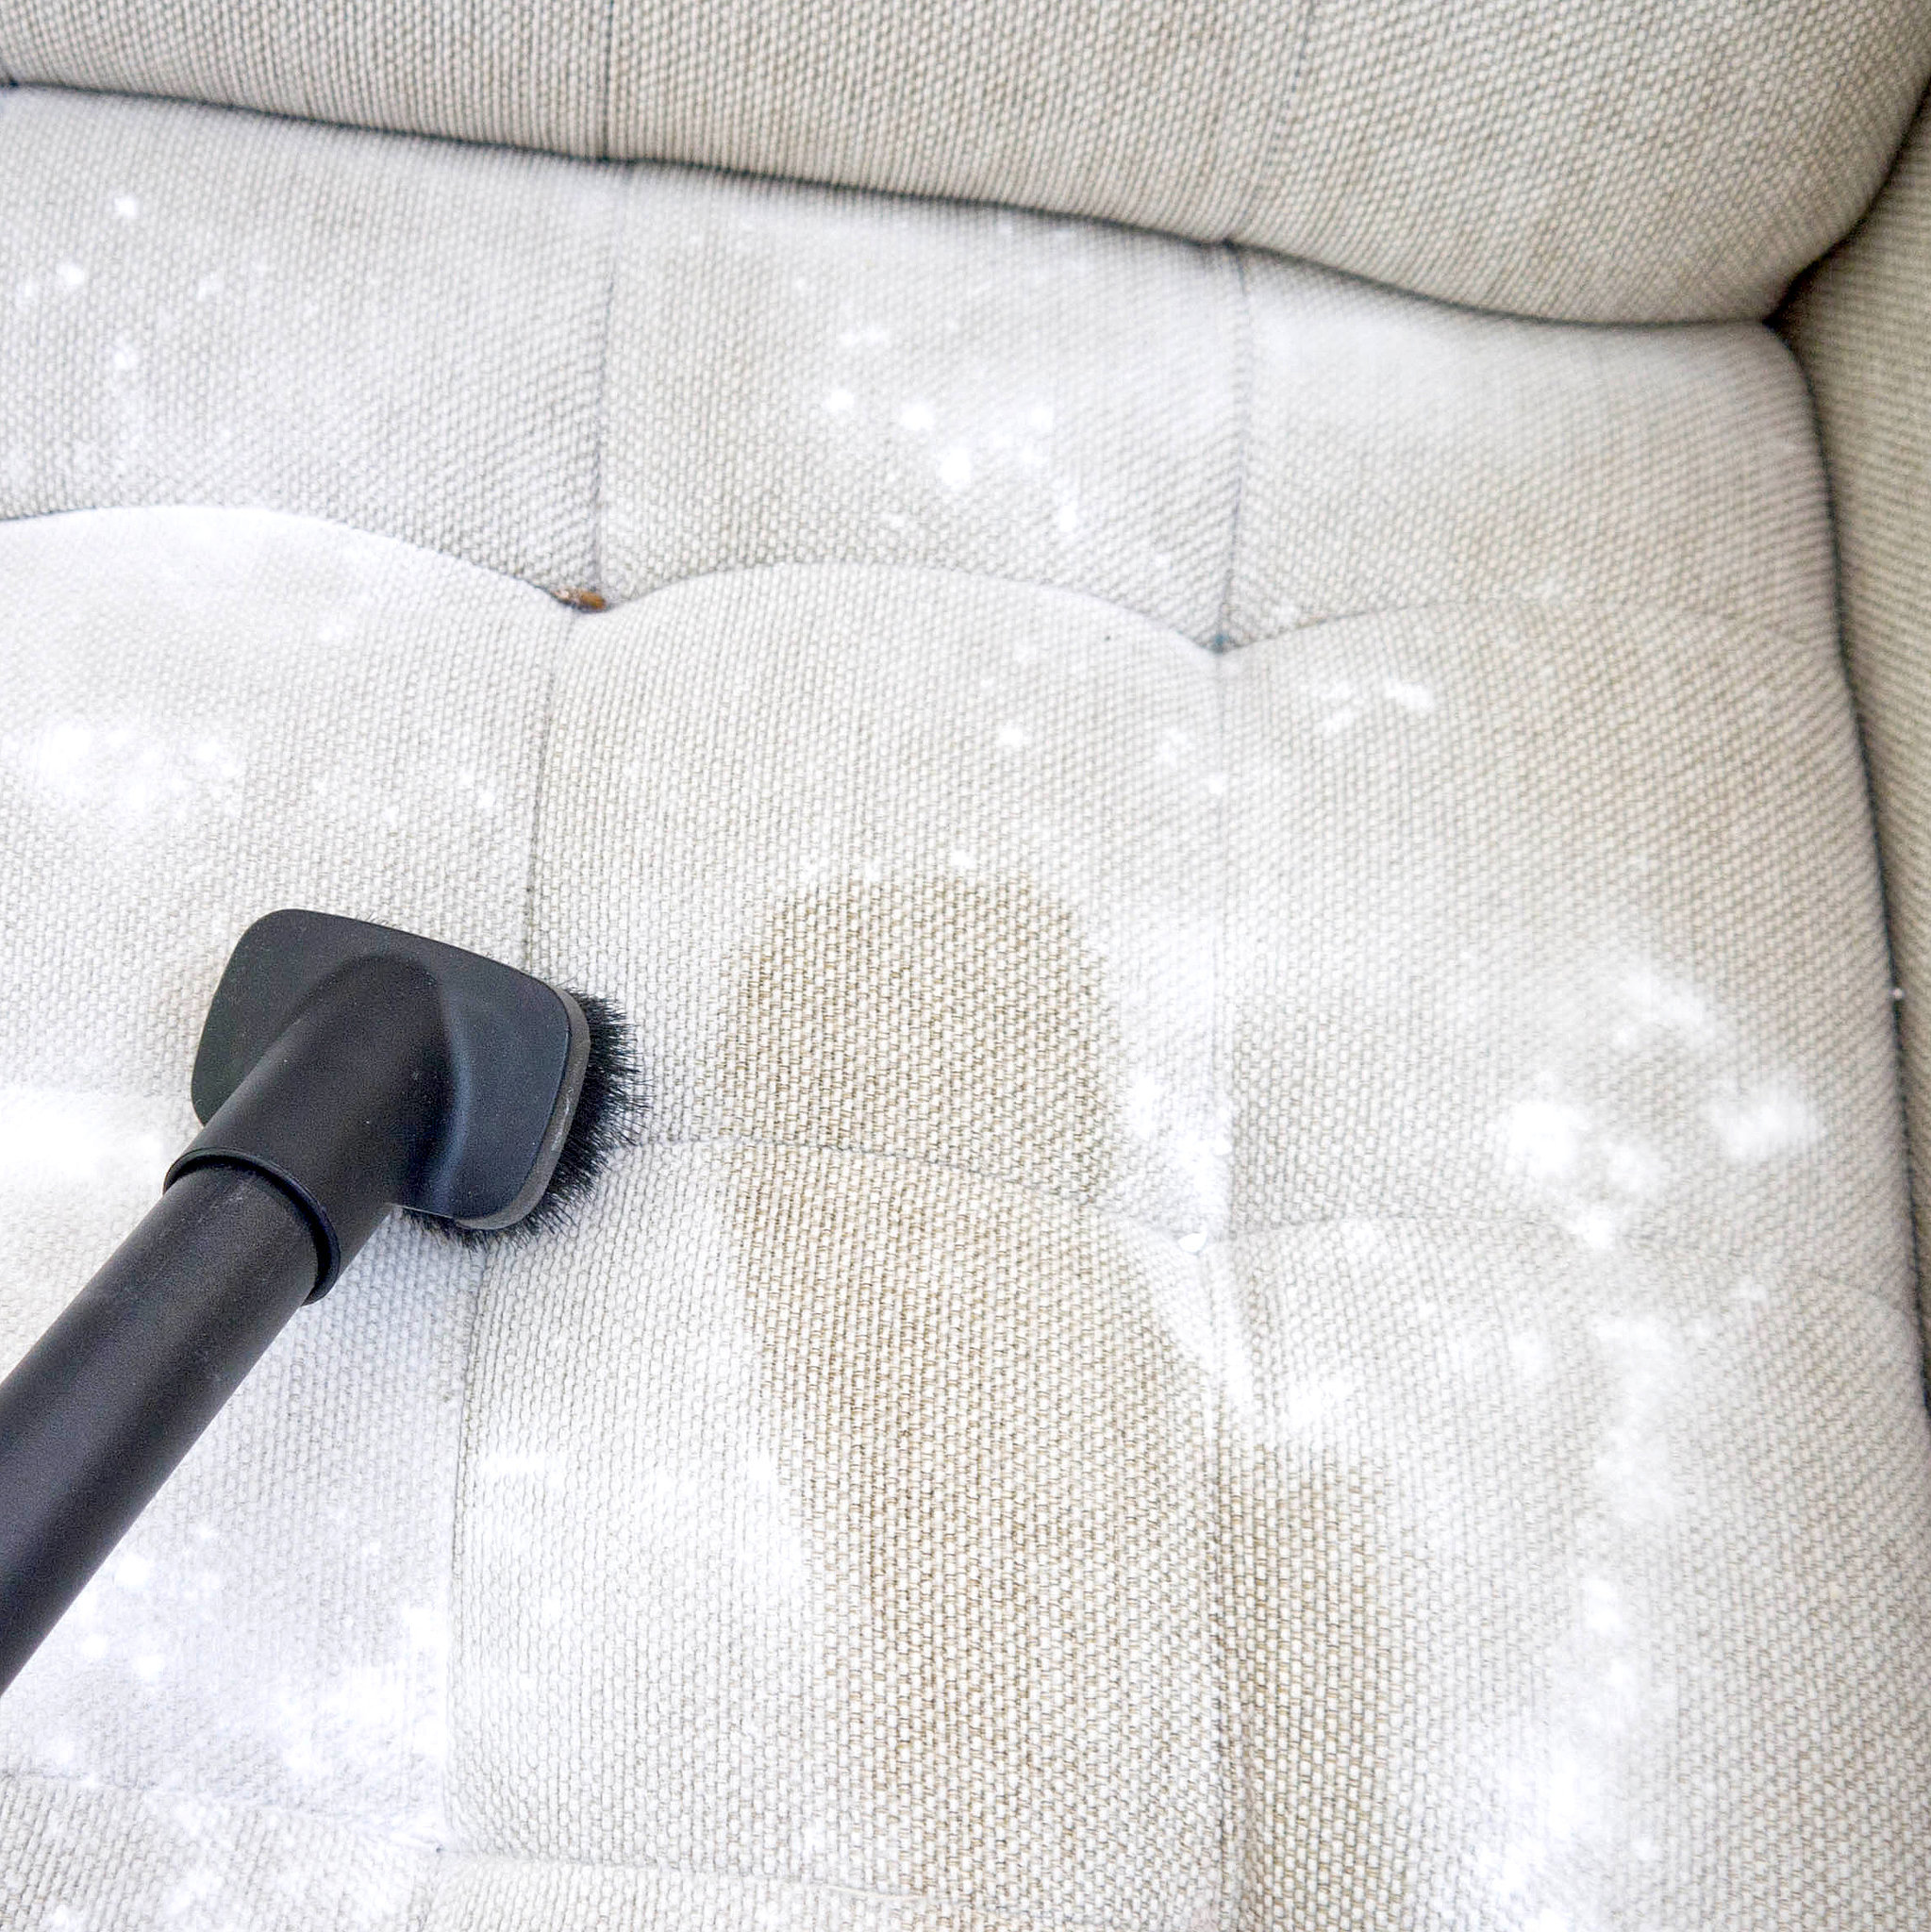 How To Clean A Natural Fabric Couch, How To Clean A Sofa With Bicarbonate Of Soda